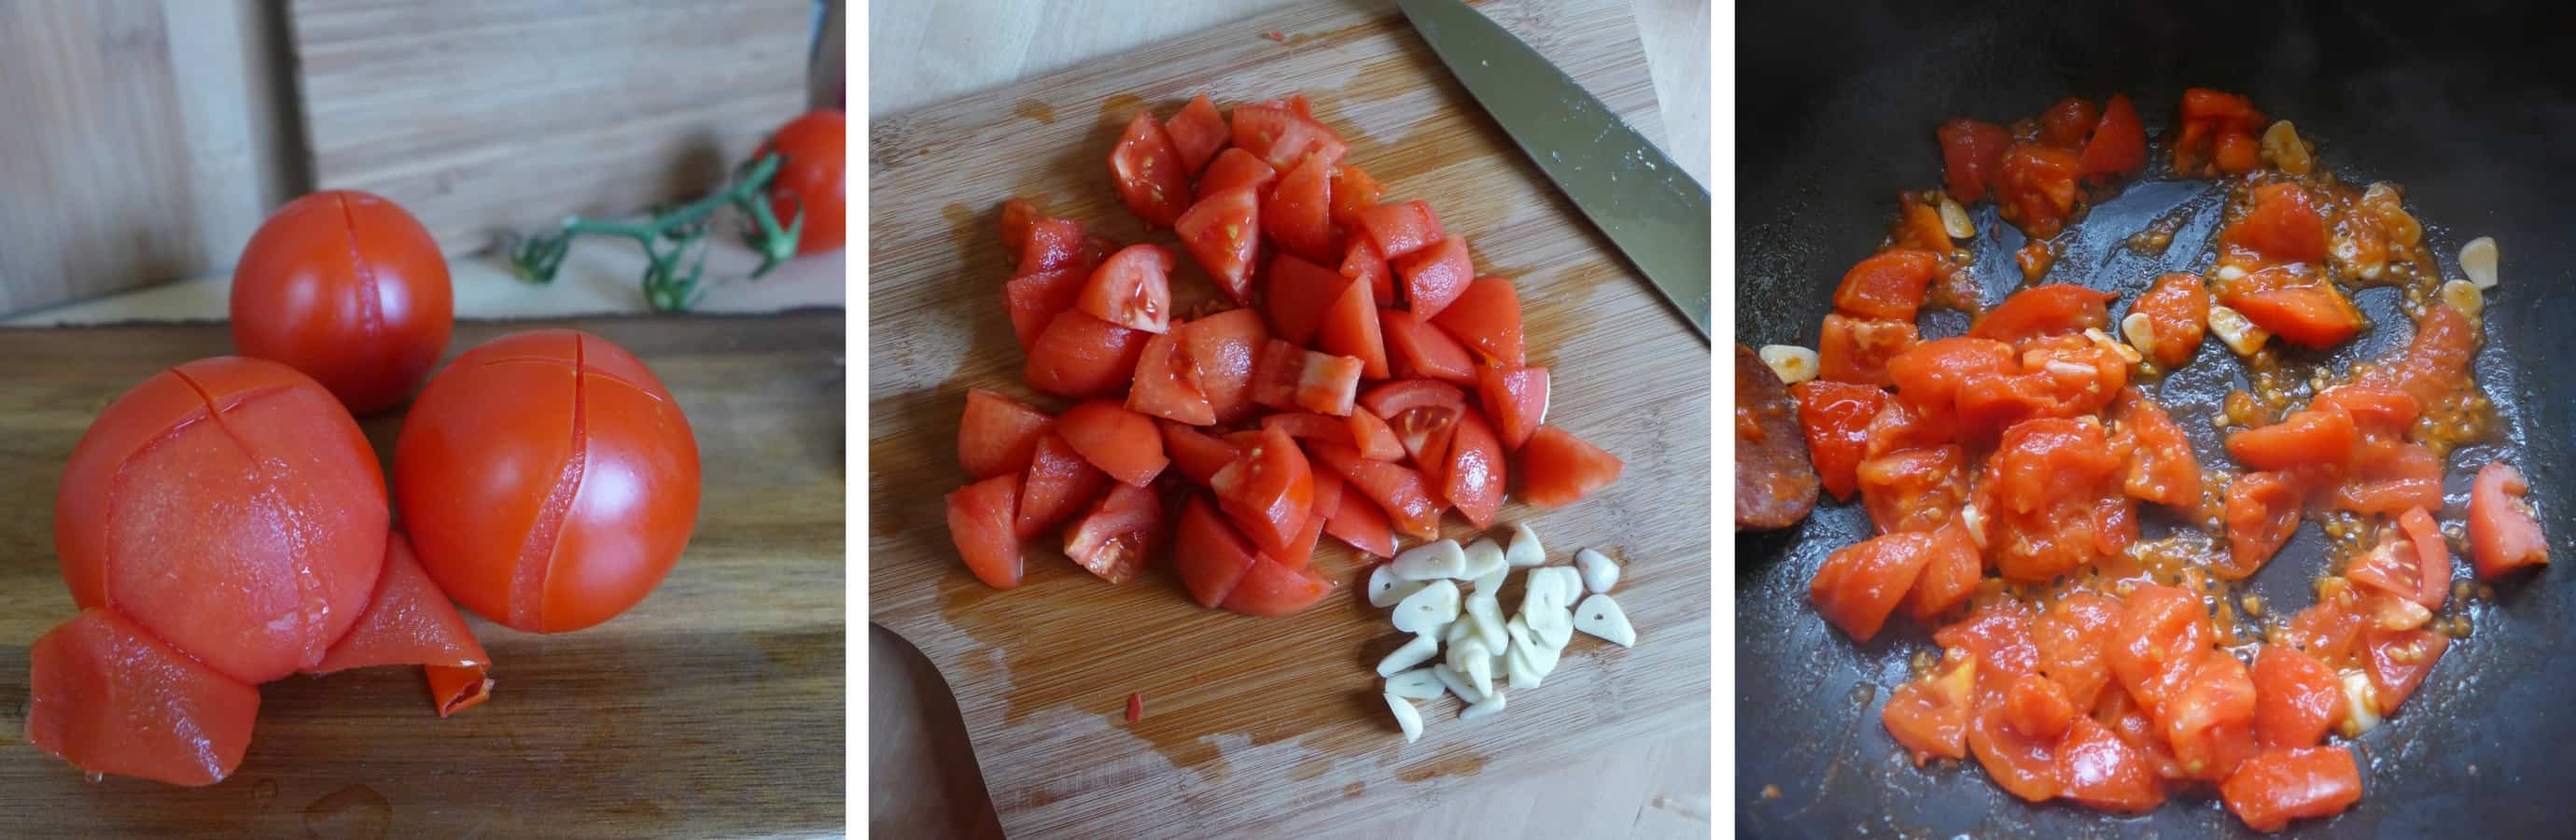 Tomatoes are peeled, chopped and fried.